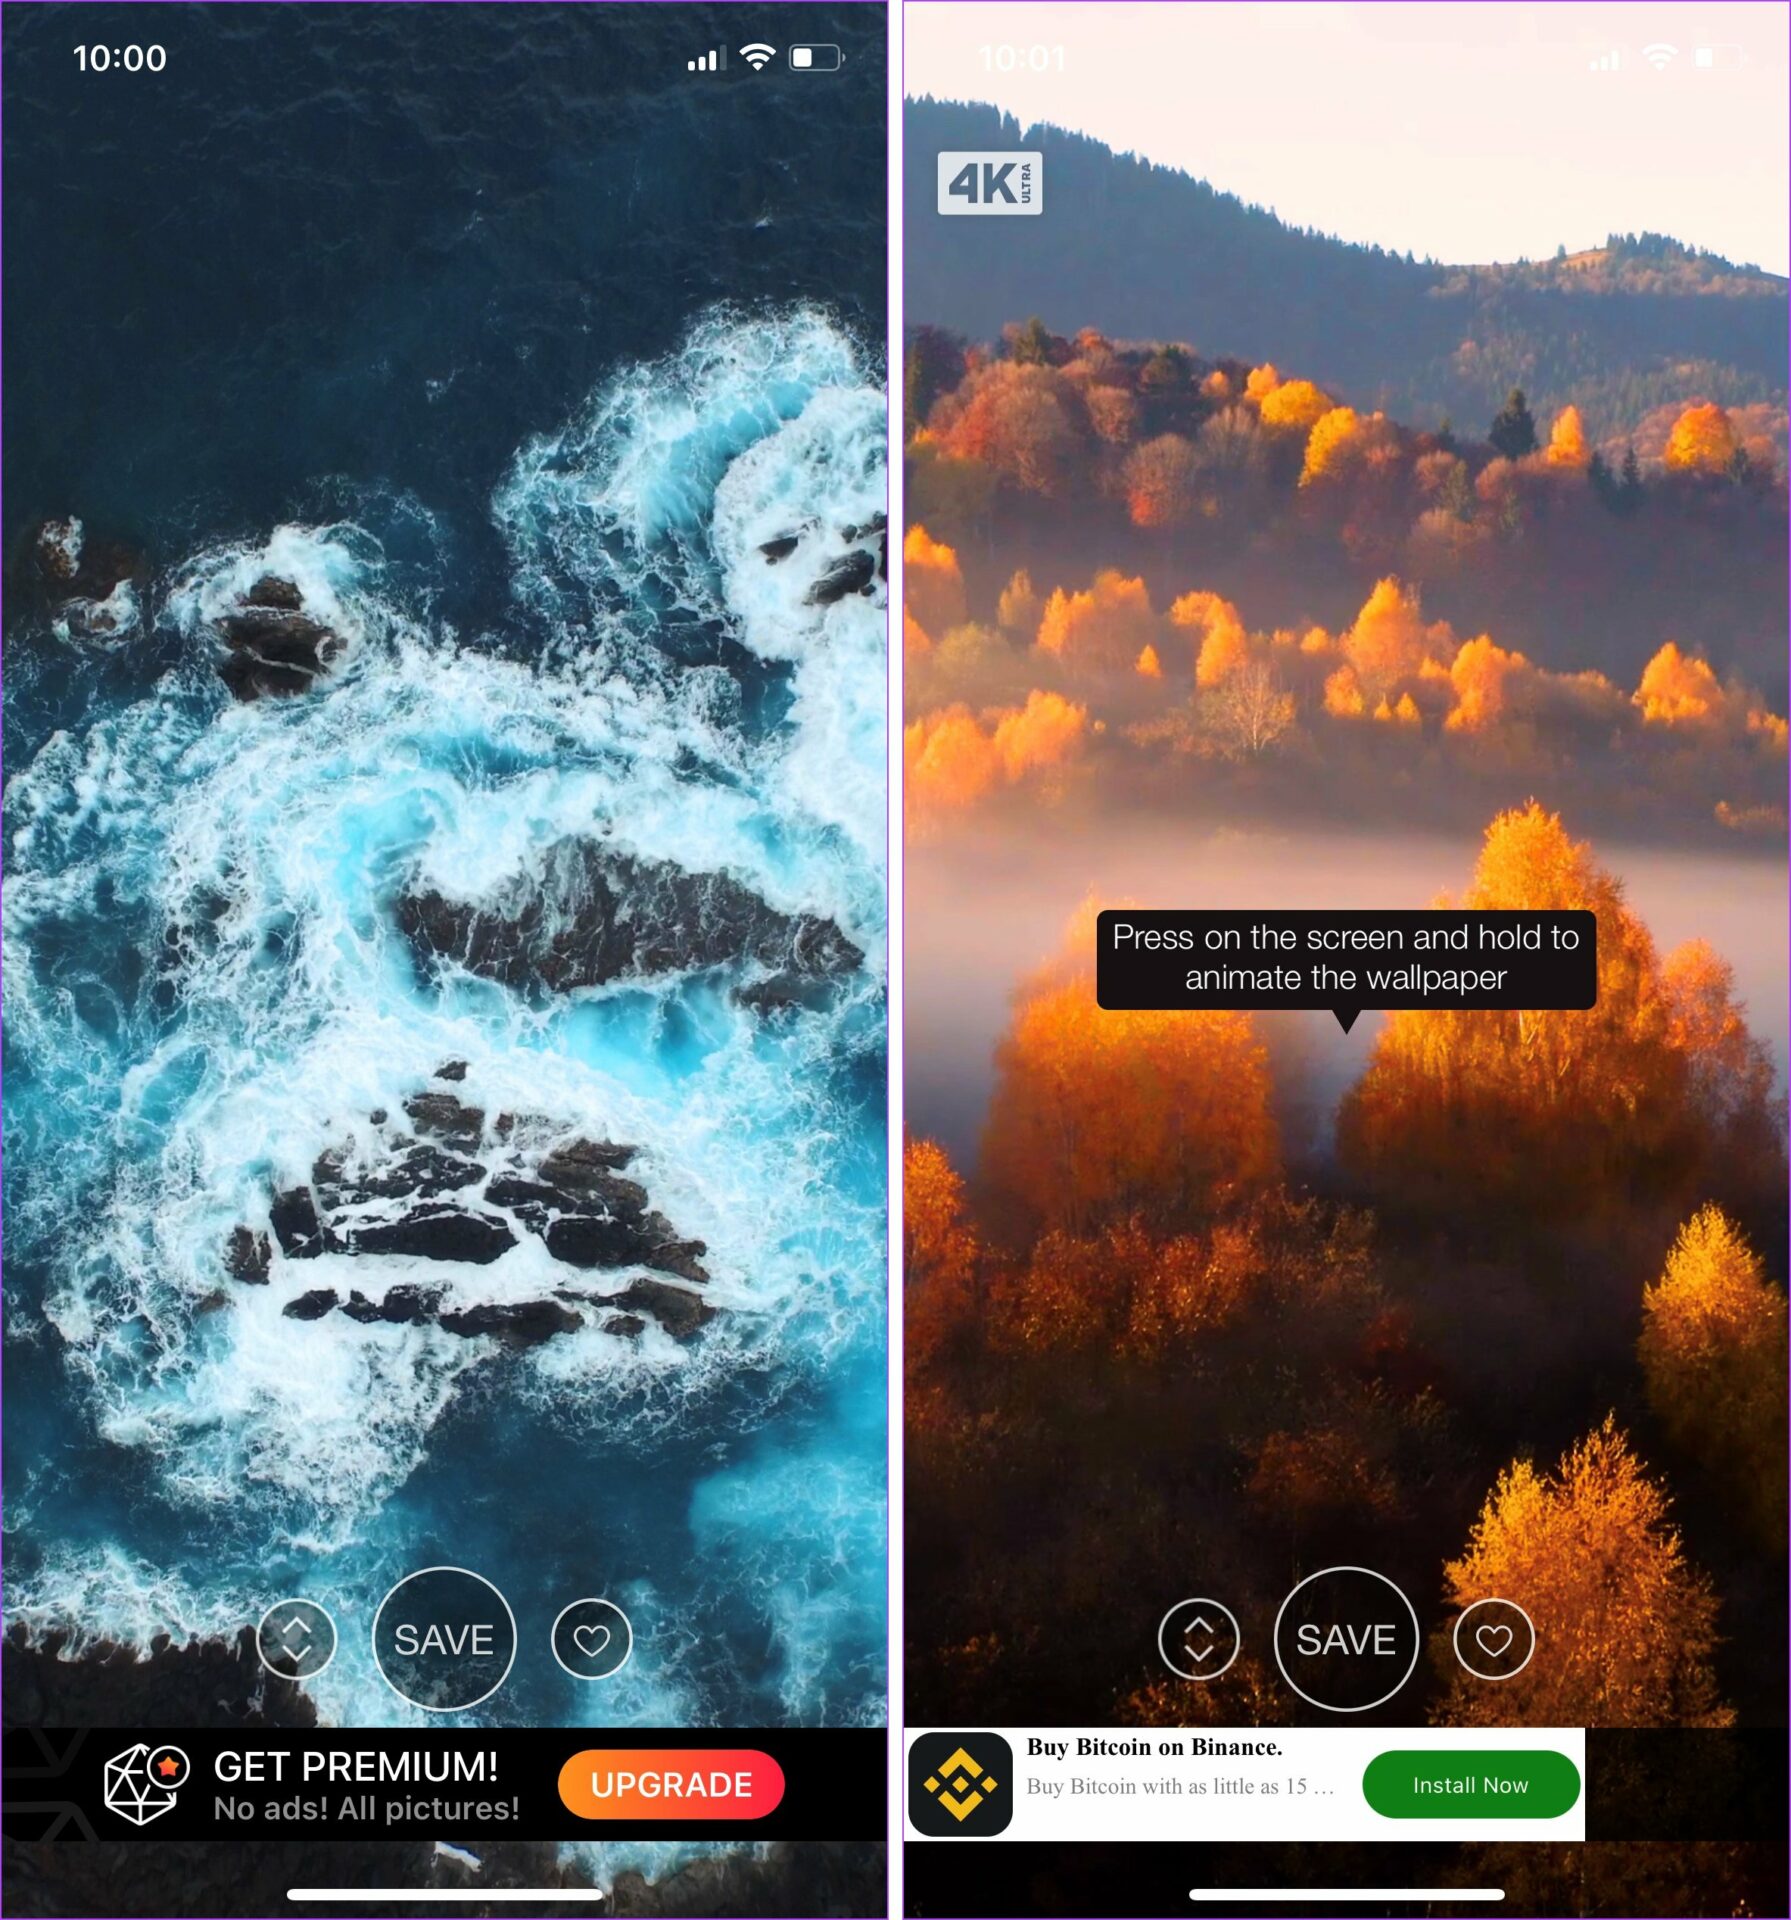 6 Best Free Wallpaper Apps for iPhone